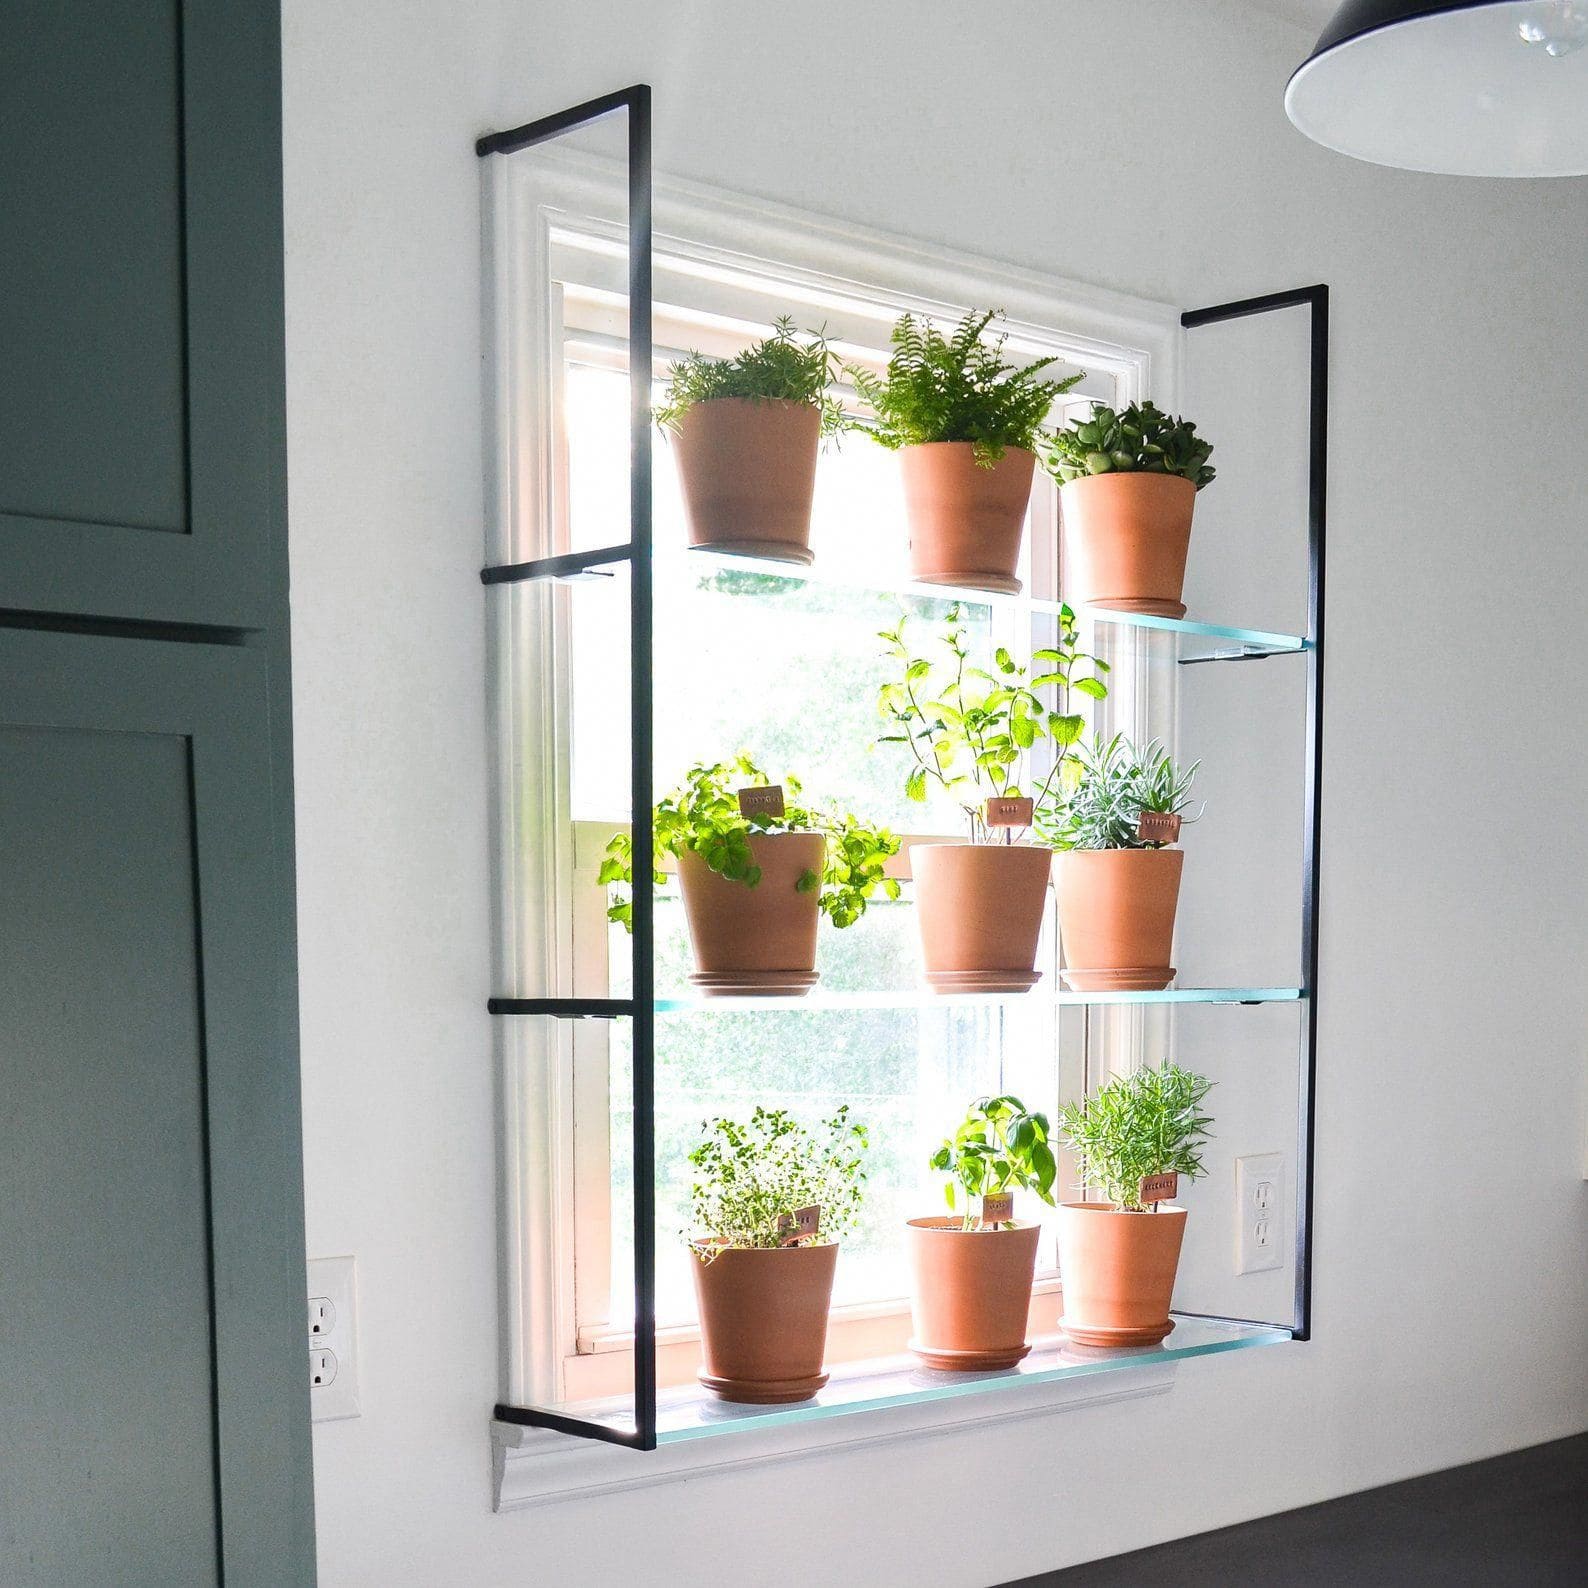 20 best ideas to make your own bathroom plant shelves - 171